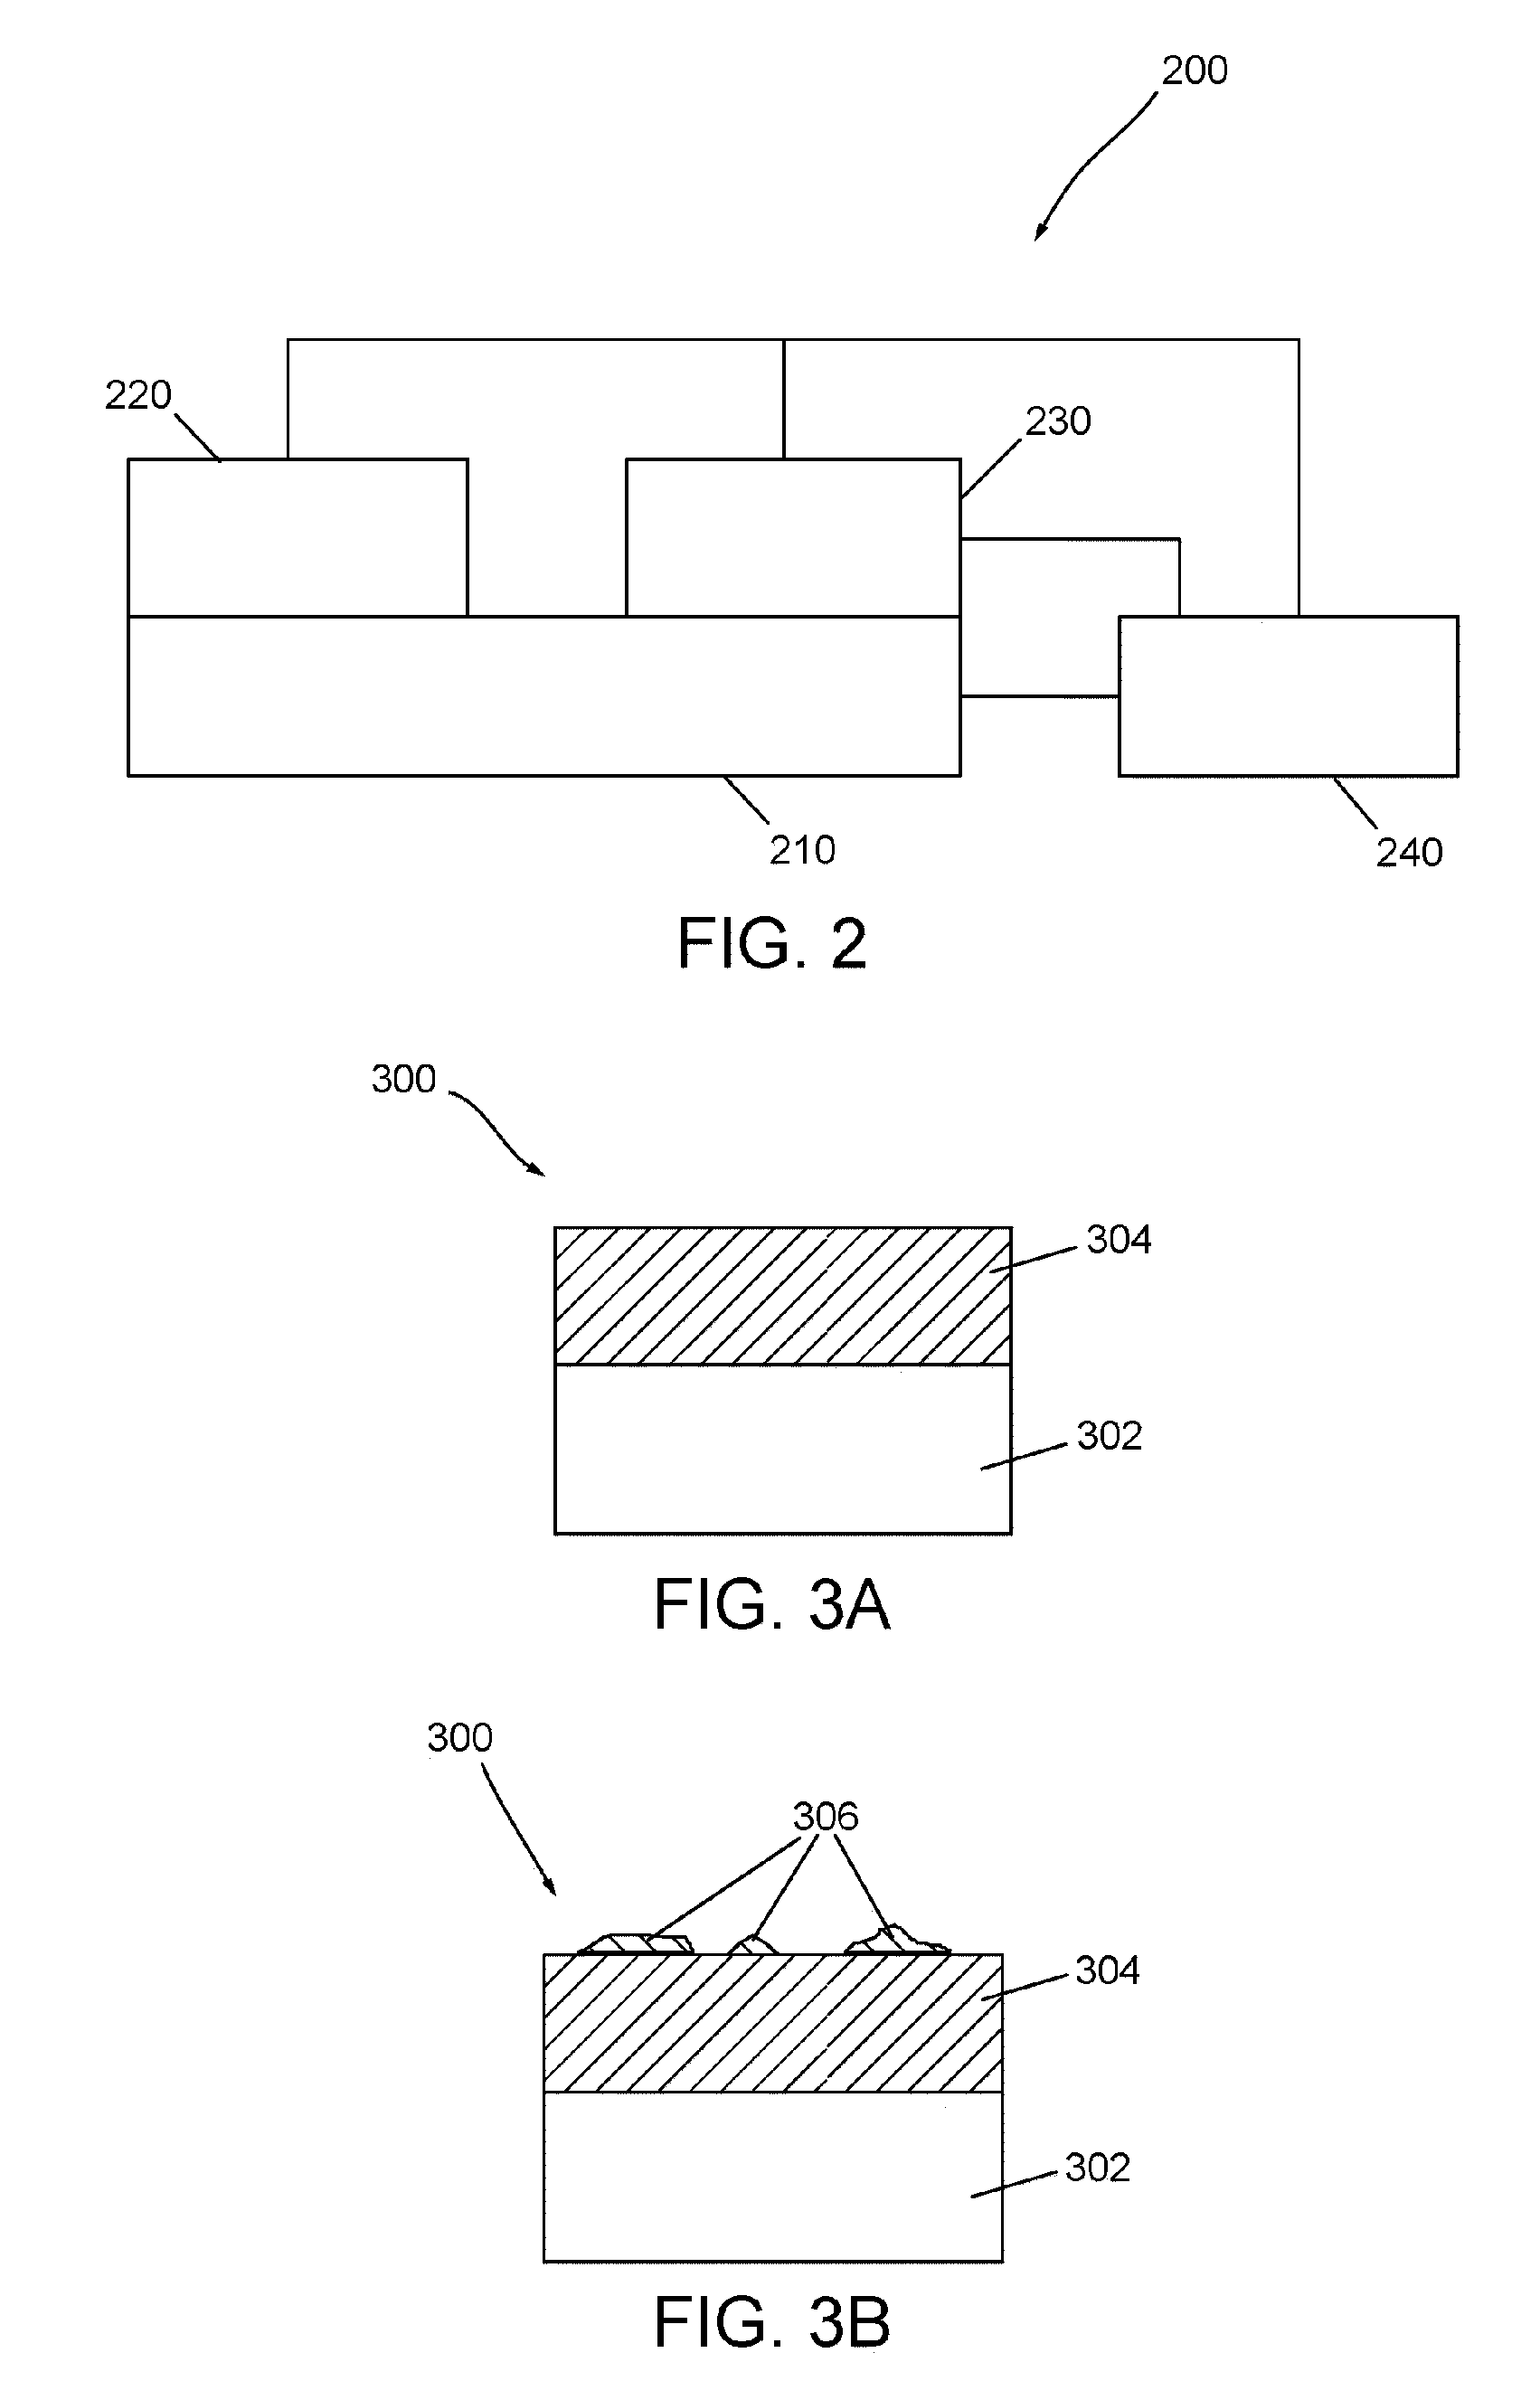 Method for forming a passivated metal layer